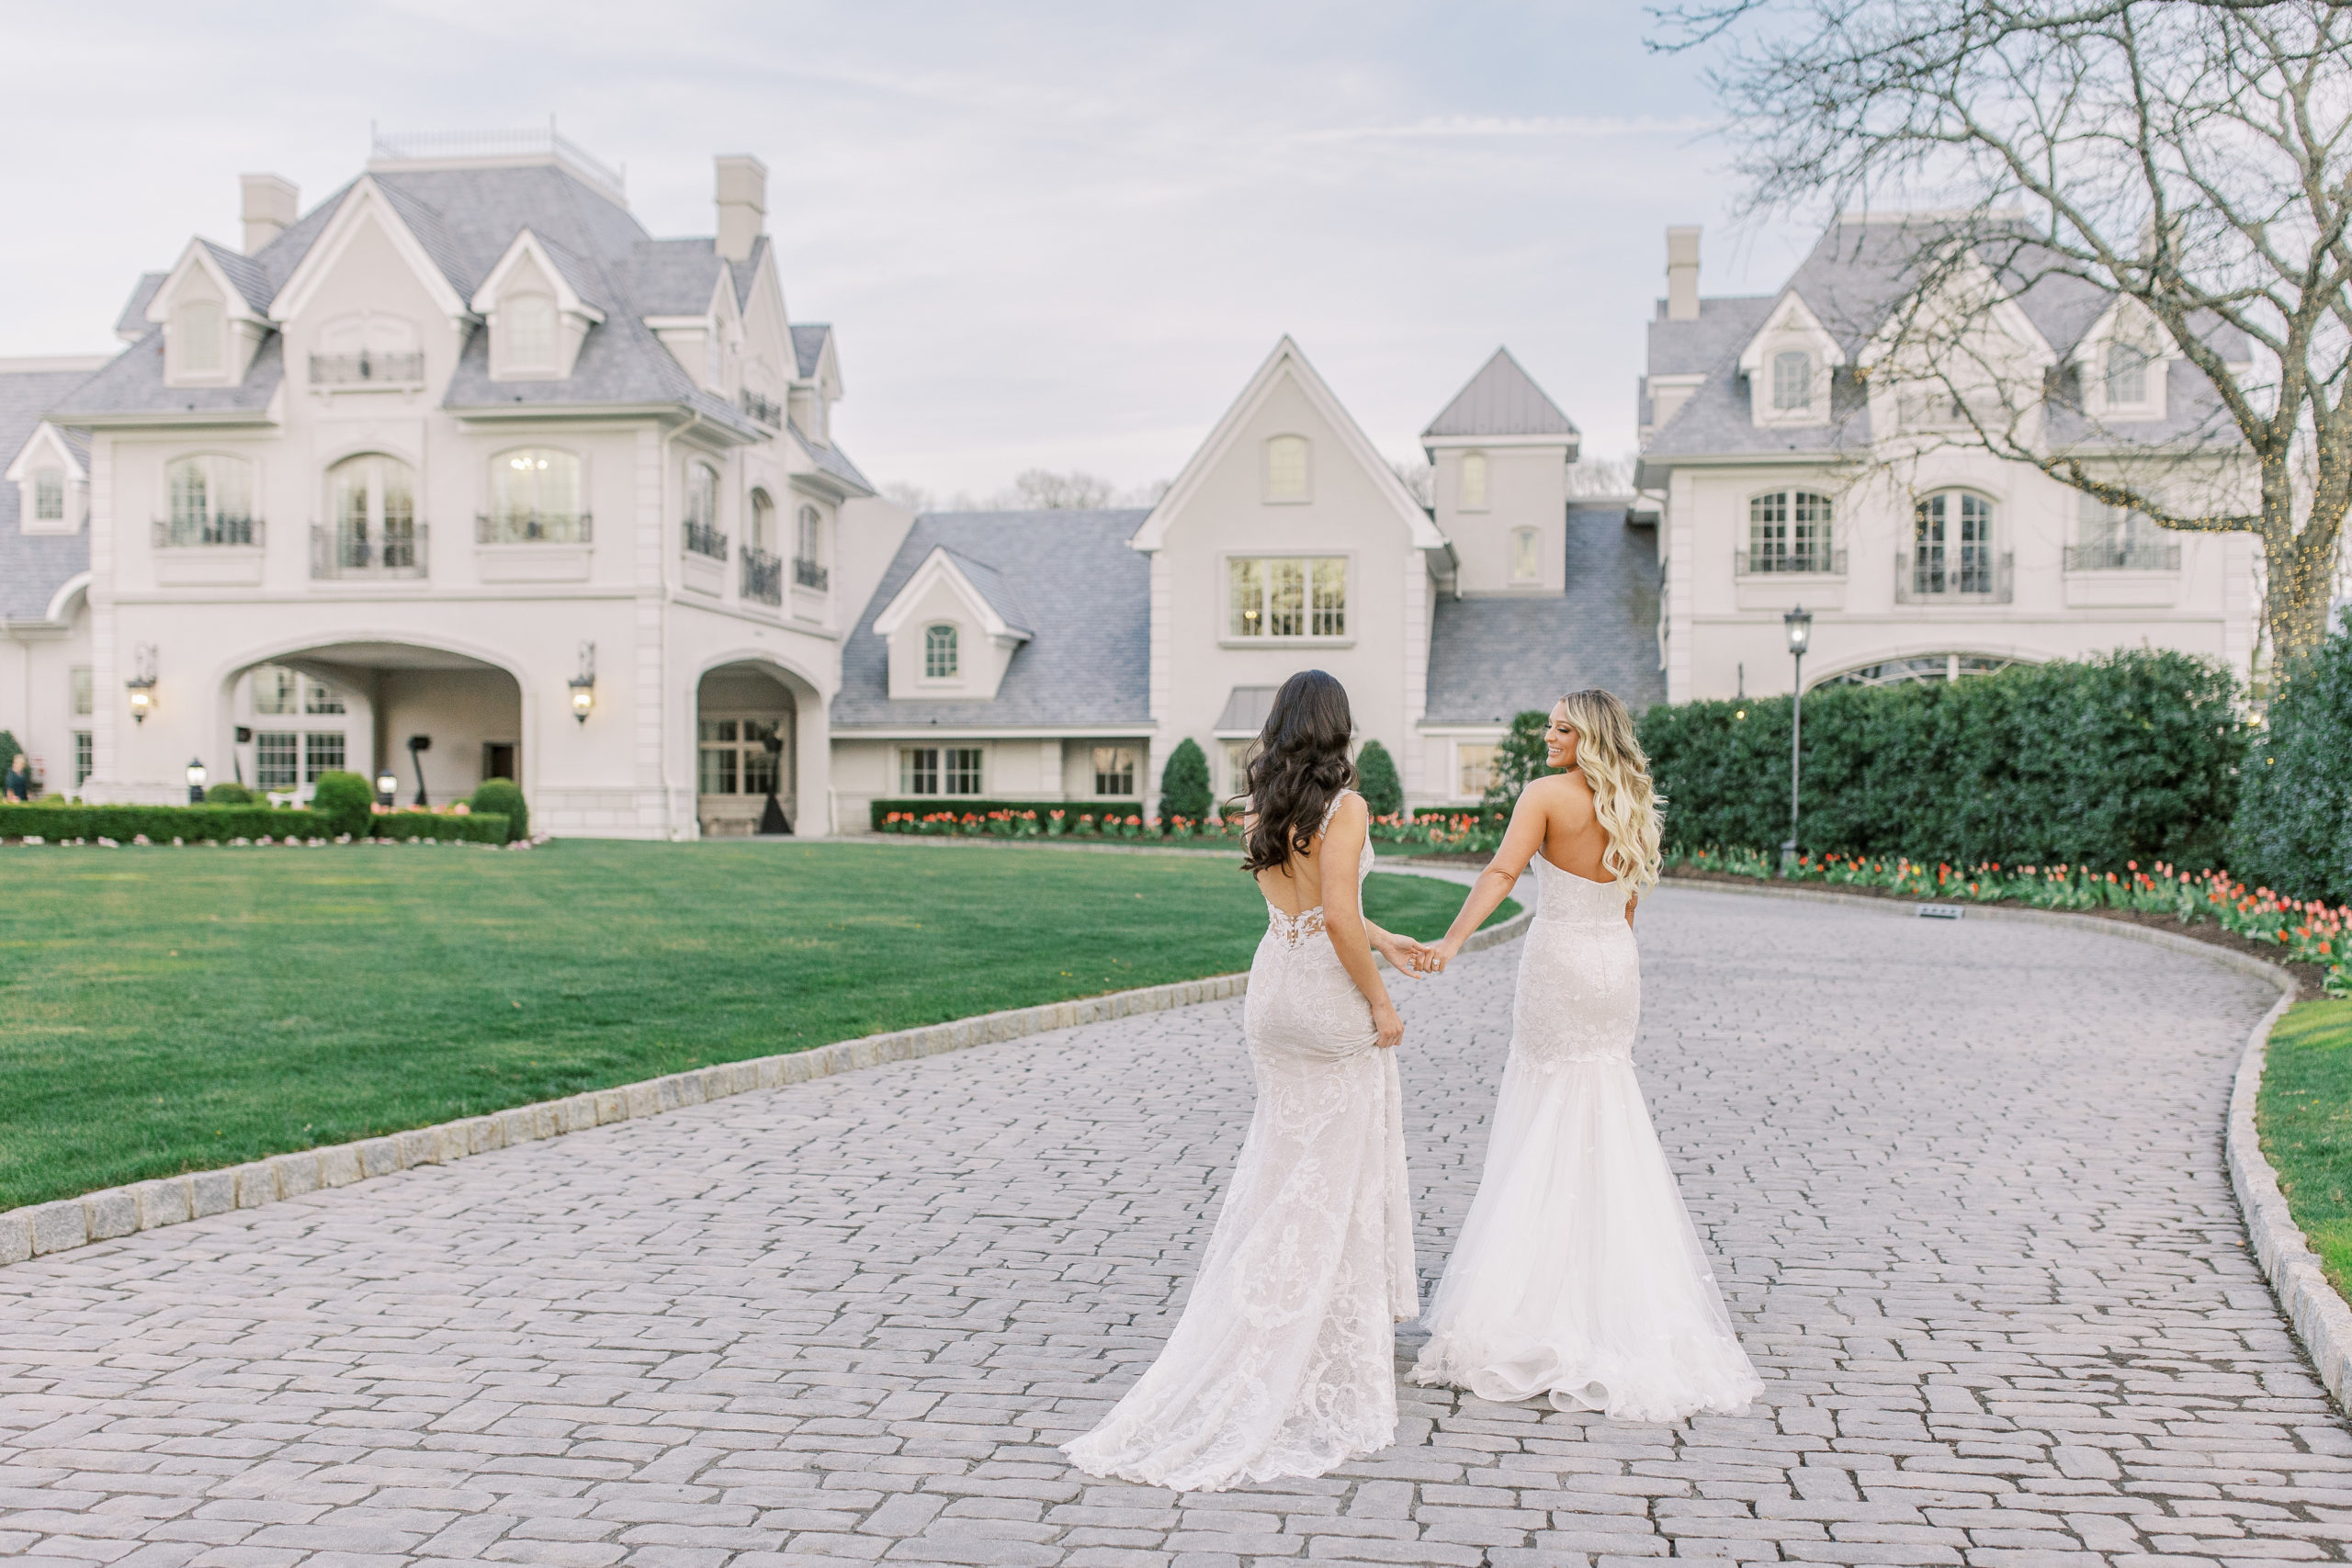 Brides smile and walk along driveway of Chateau venue 